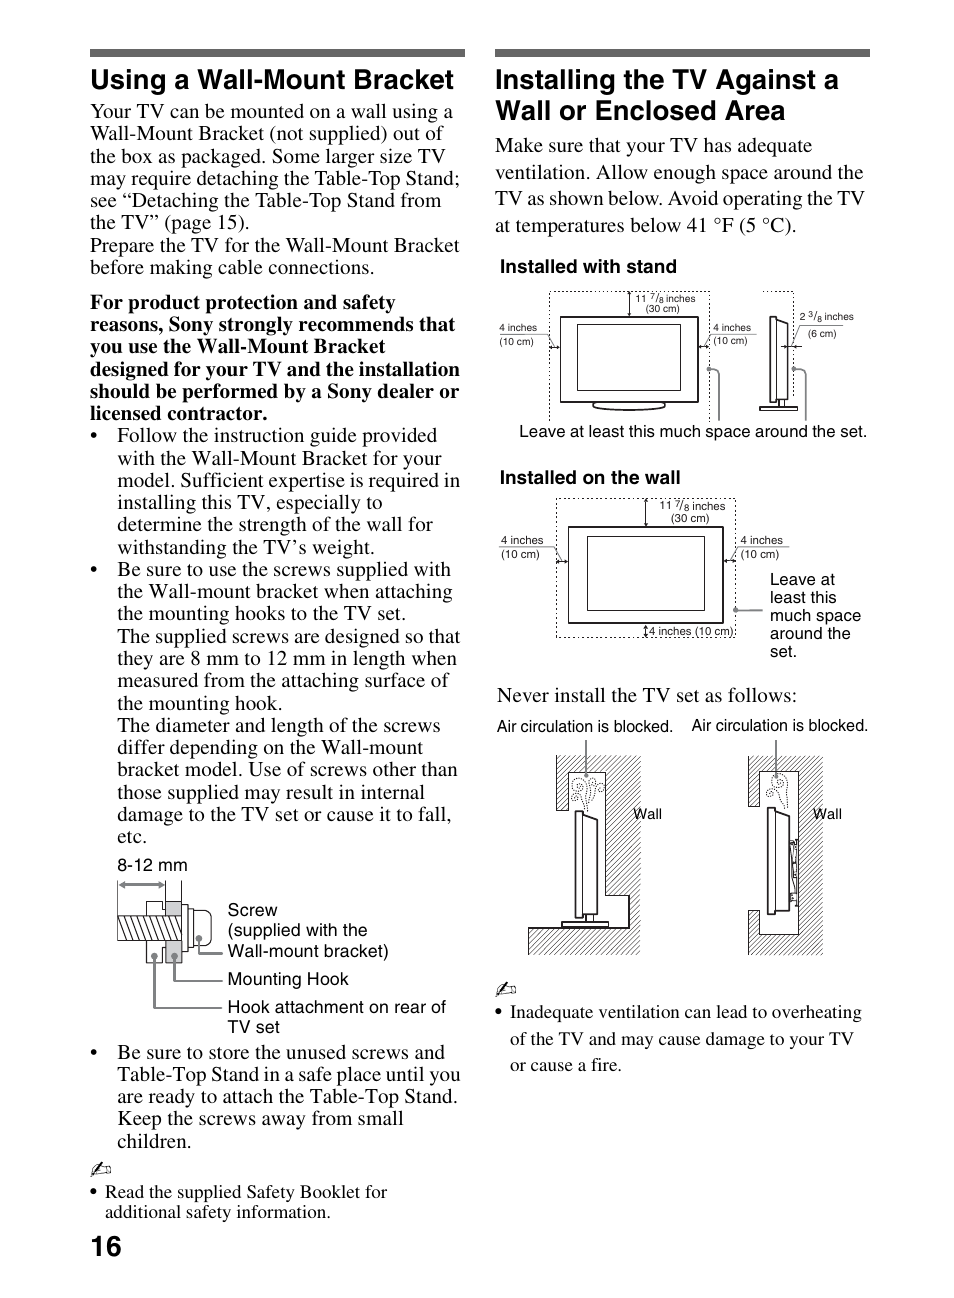 Using a wall-mount bracket, Installing the tv against a wall or enclosed area, Never install the tv set as follows | Installed with stand, Installed on the wall | Sony KDL-52NX800 User Manual | Page 16 / 24